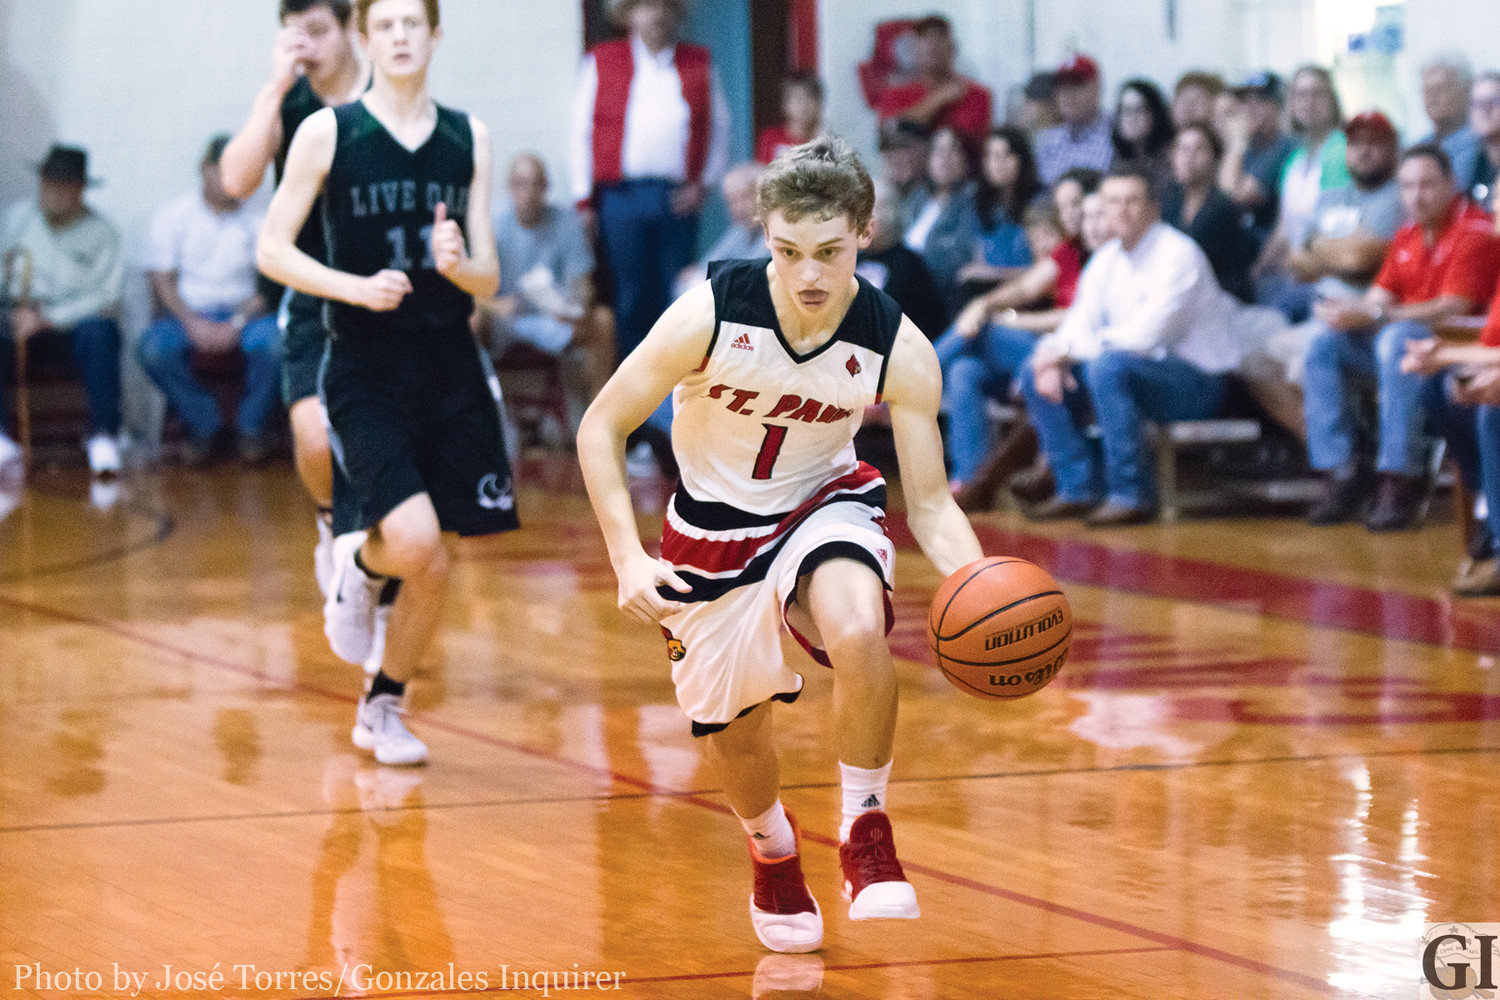 Kai Giese (1) led the team in scoring with 25 points in Shiner St. Paul’s 72-57 win over Waco Live Oak. The freshman guard exploded for 15 points in the third quarter, scoring the first 12 points for St. Paul the second half.